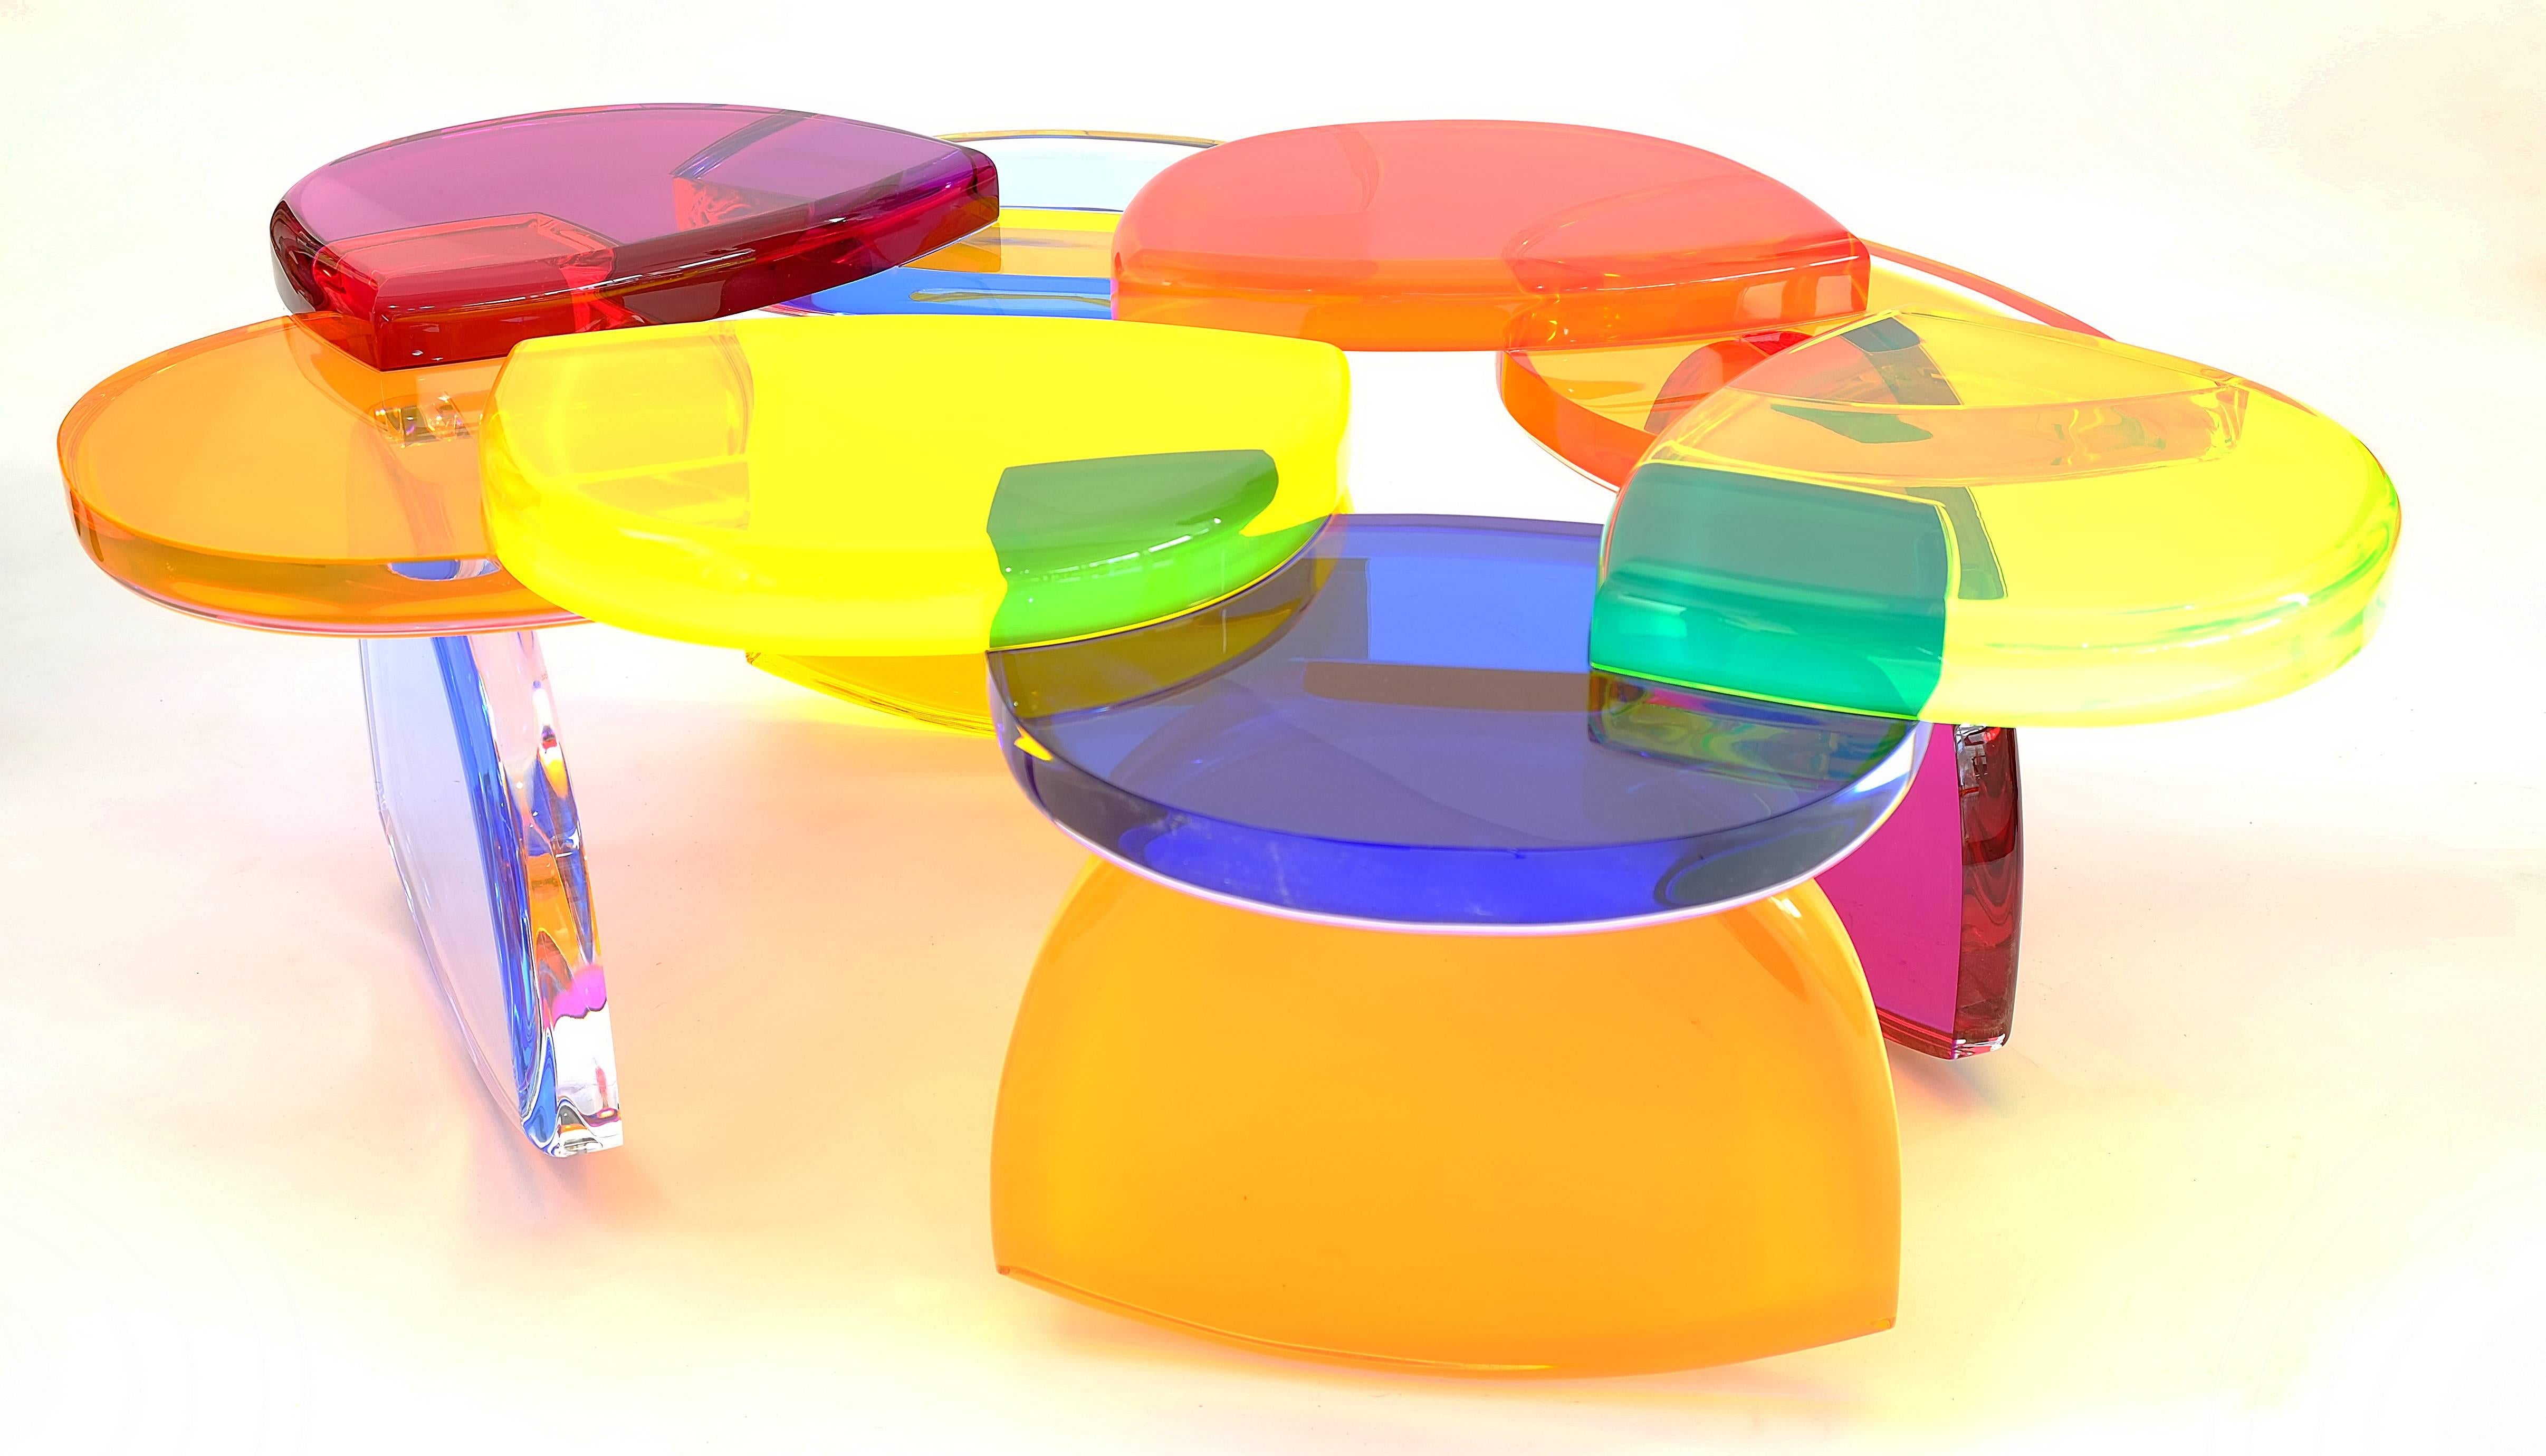 A beautiful coffee table with a structure of colored sequences of plexiglass modules that are repeated by building the shape.
A series of unique pieces designed and produced by Studio Superego.
Each table is a unique piece for the different